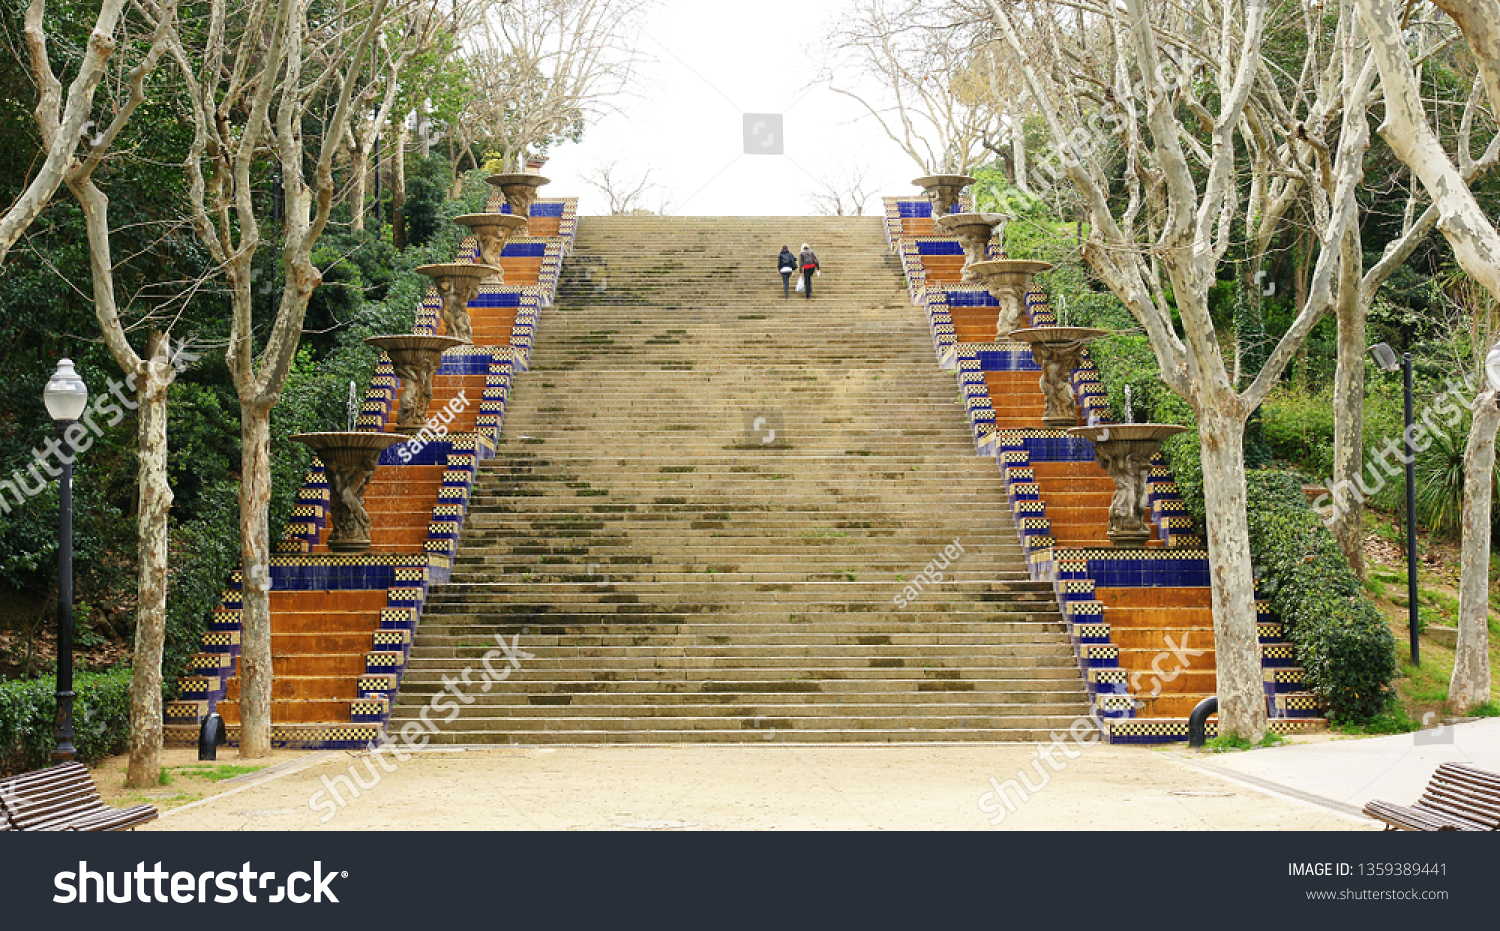 Stairs with ornamental pots in Montjuic, Barcelona, Catalunya, Spain, Europe #1359389441